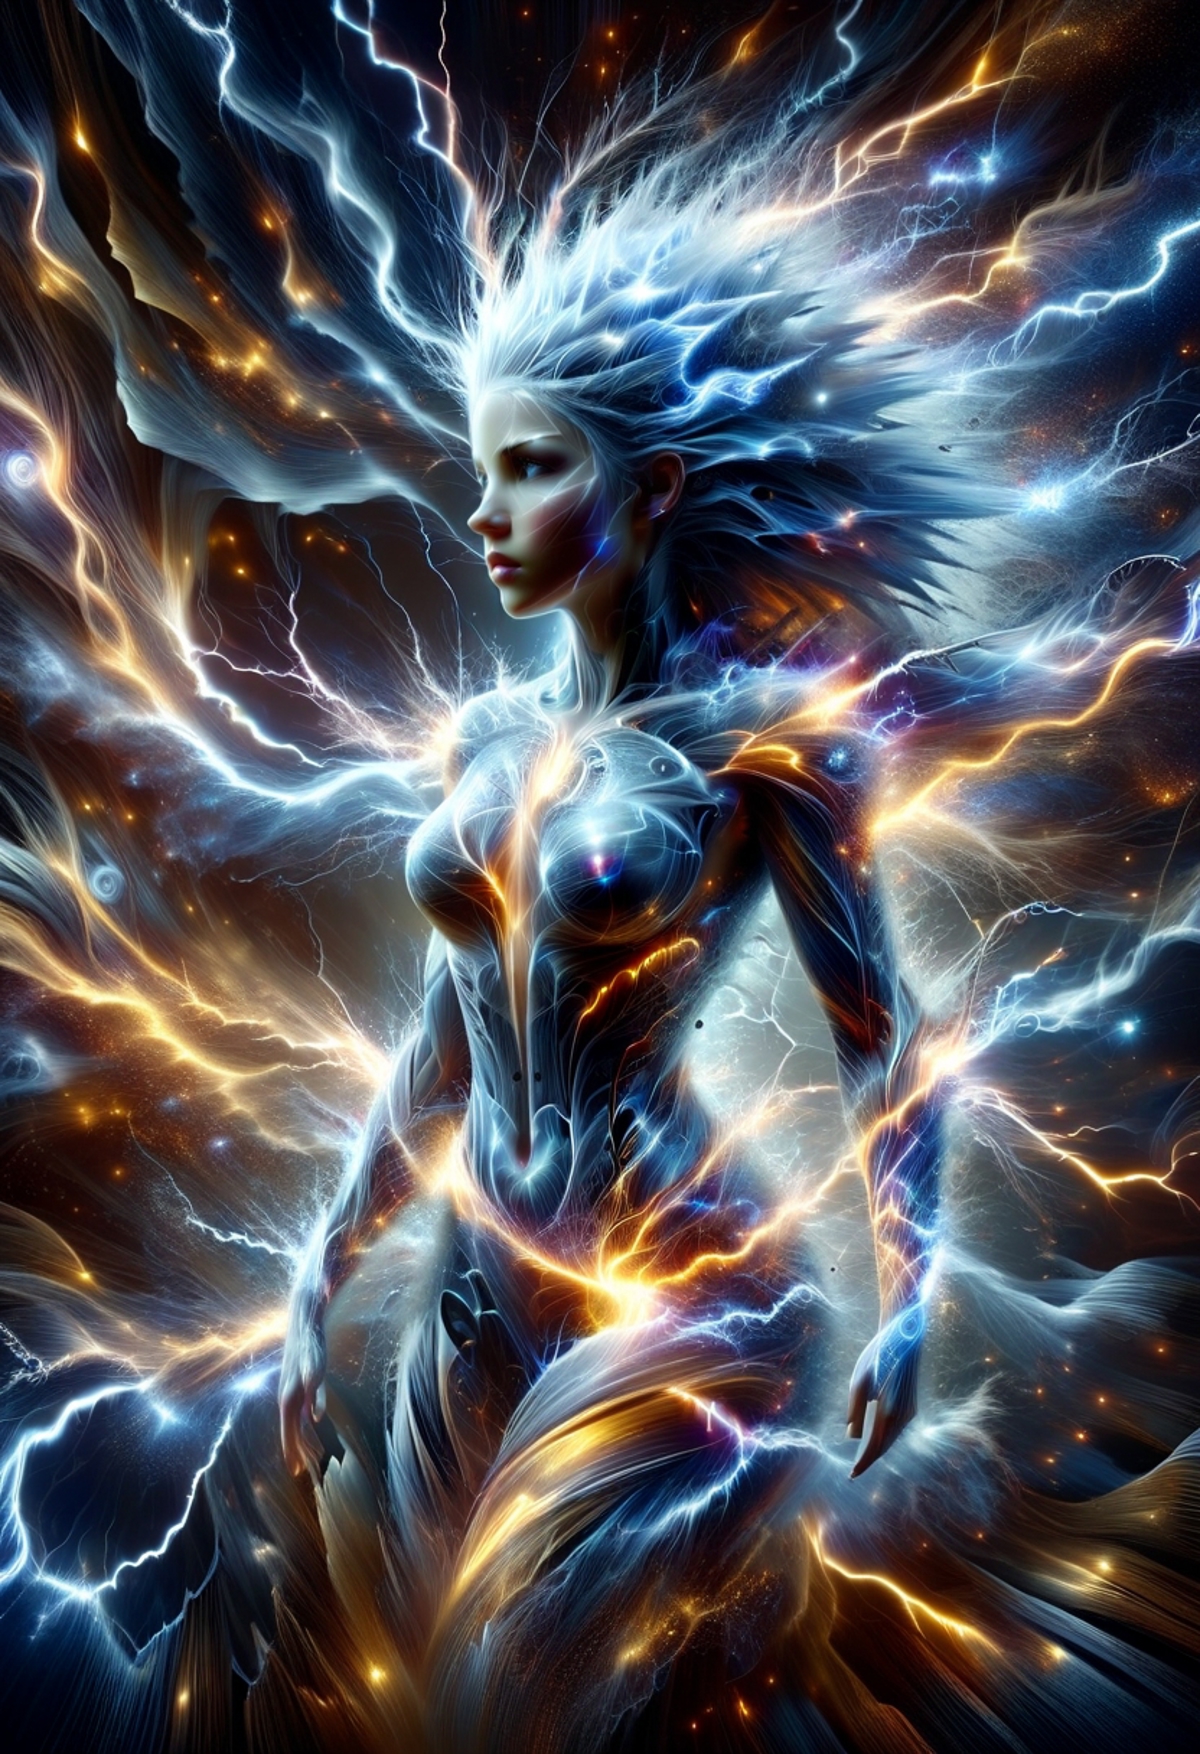 A Digital Art Image of a Woman with Lightning Bolts and Colorful Hair.